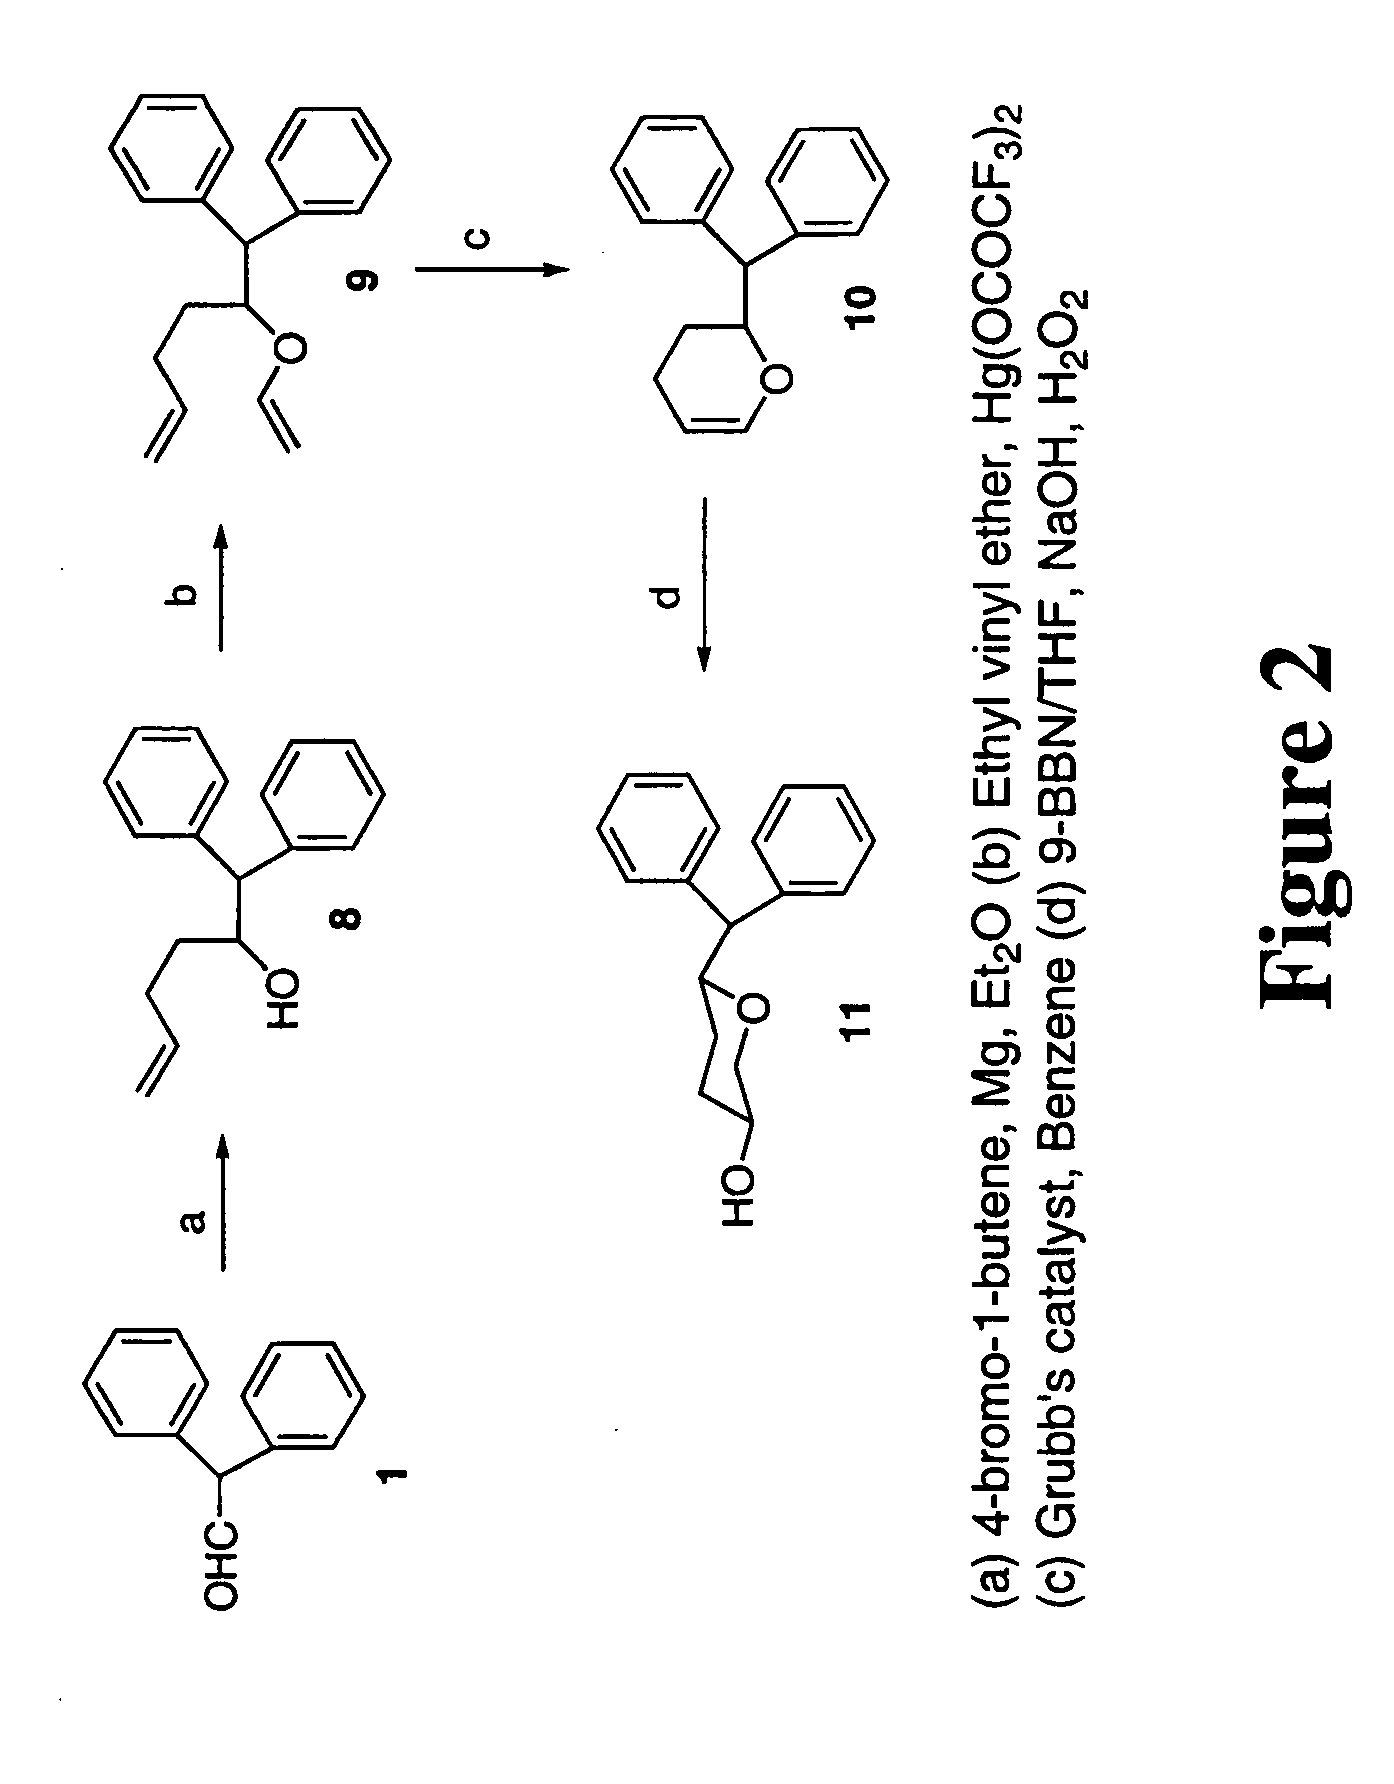 Tri-substituted 2-benzhydryl-5-benzlamino-tetrahydro-pyran-4-ol and 6-benzhydryl-4-benzylamino-tetrahydro-pyran-3-ol analogues, and novel 3,6-disubstituted pyran derivatives